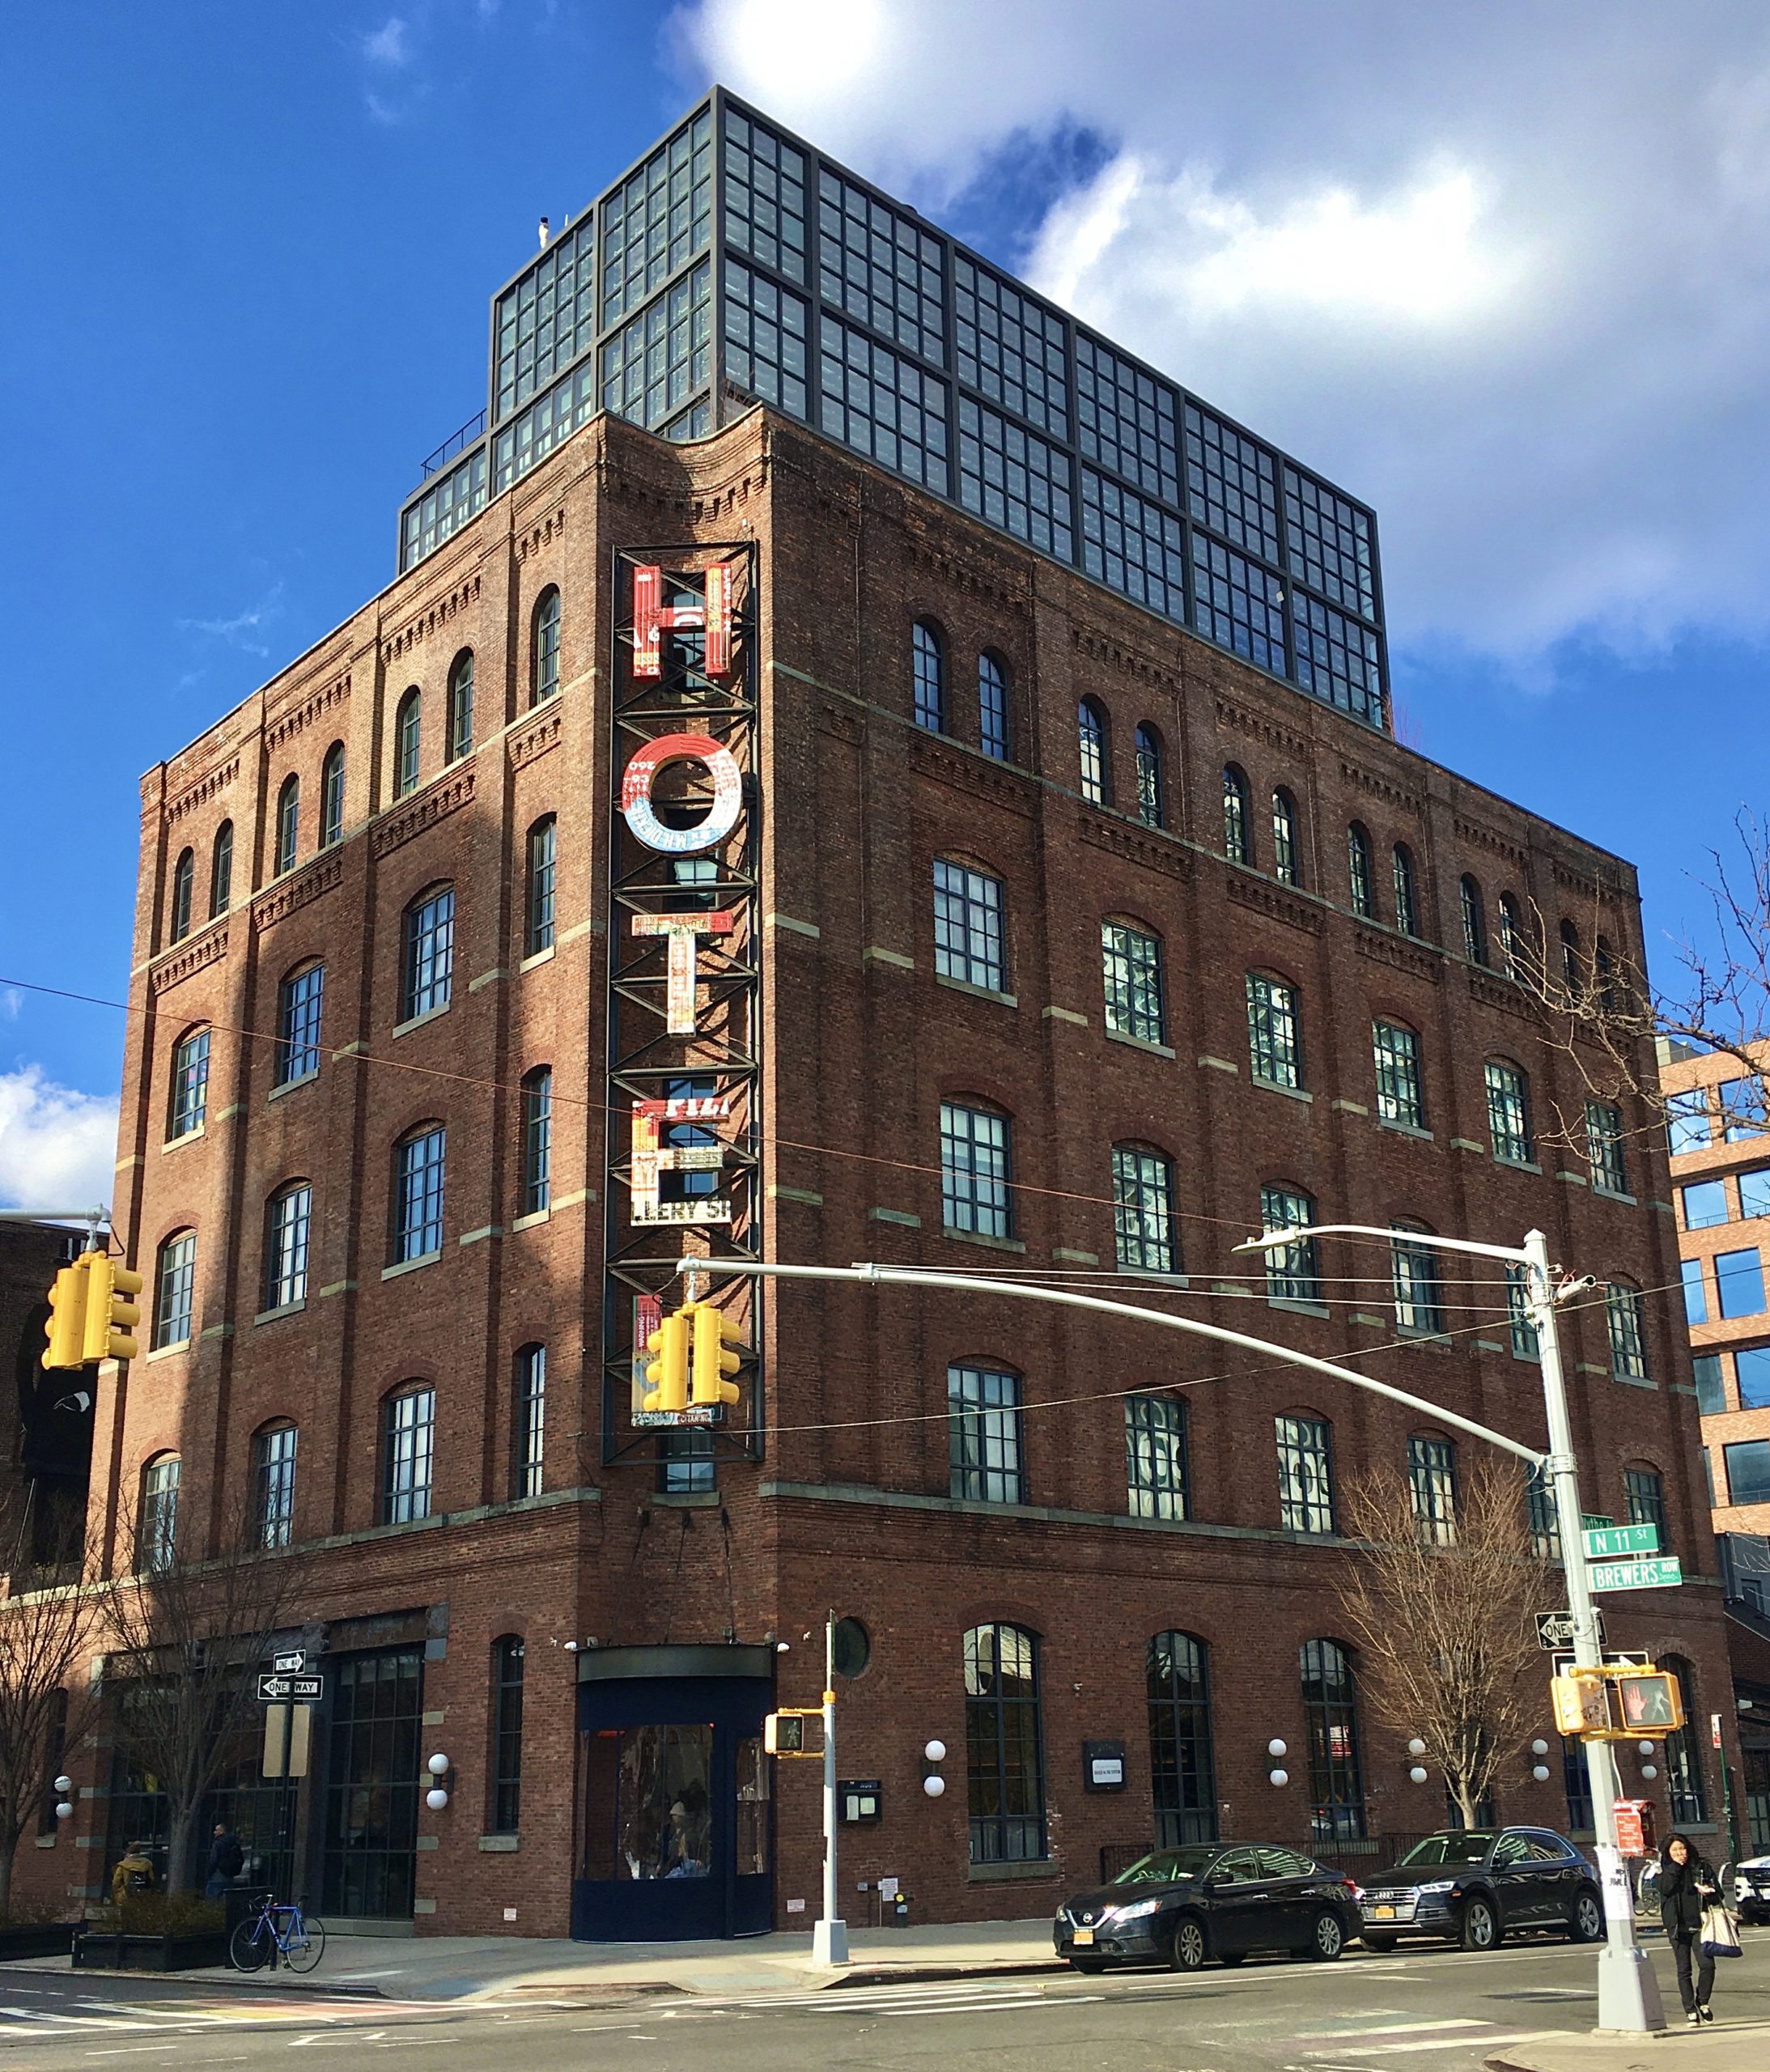 Here’s the Wythe Hotel as seen from the corner of Wythe Avenue and North 11th Street. Photo: Lore Croghan/Brooklyn Eagle